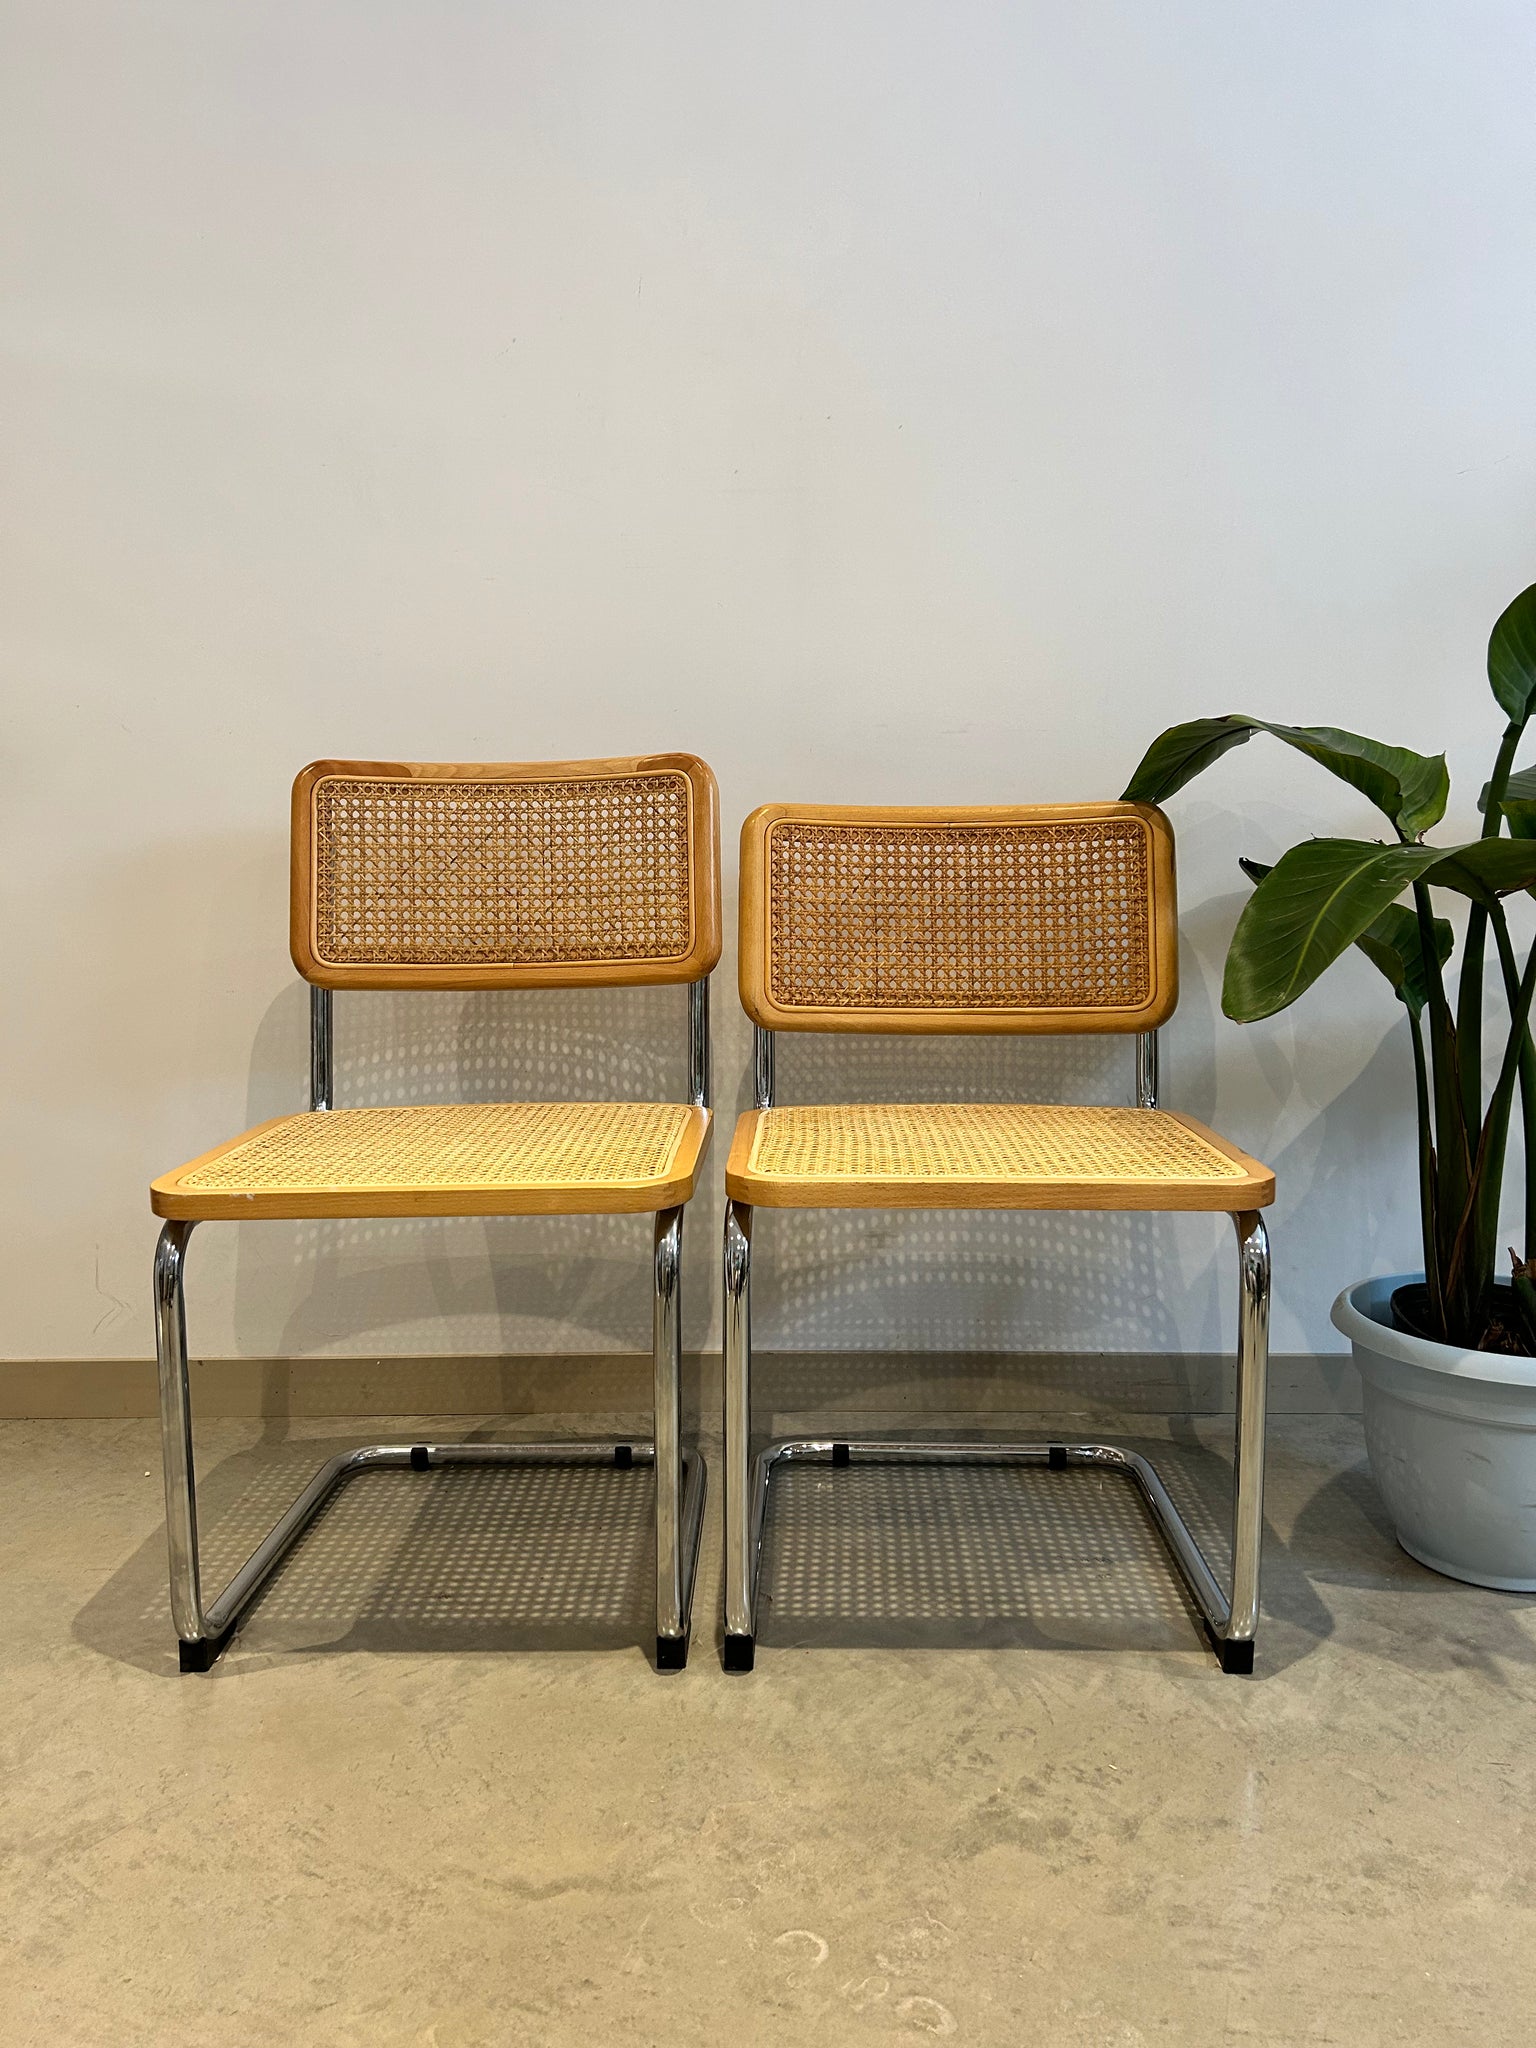 Chrome & cane cantilever Cesca style chairs